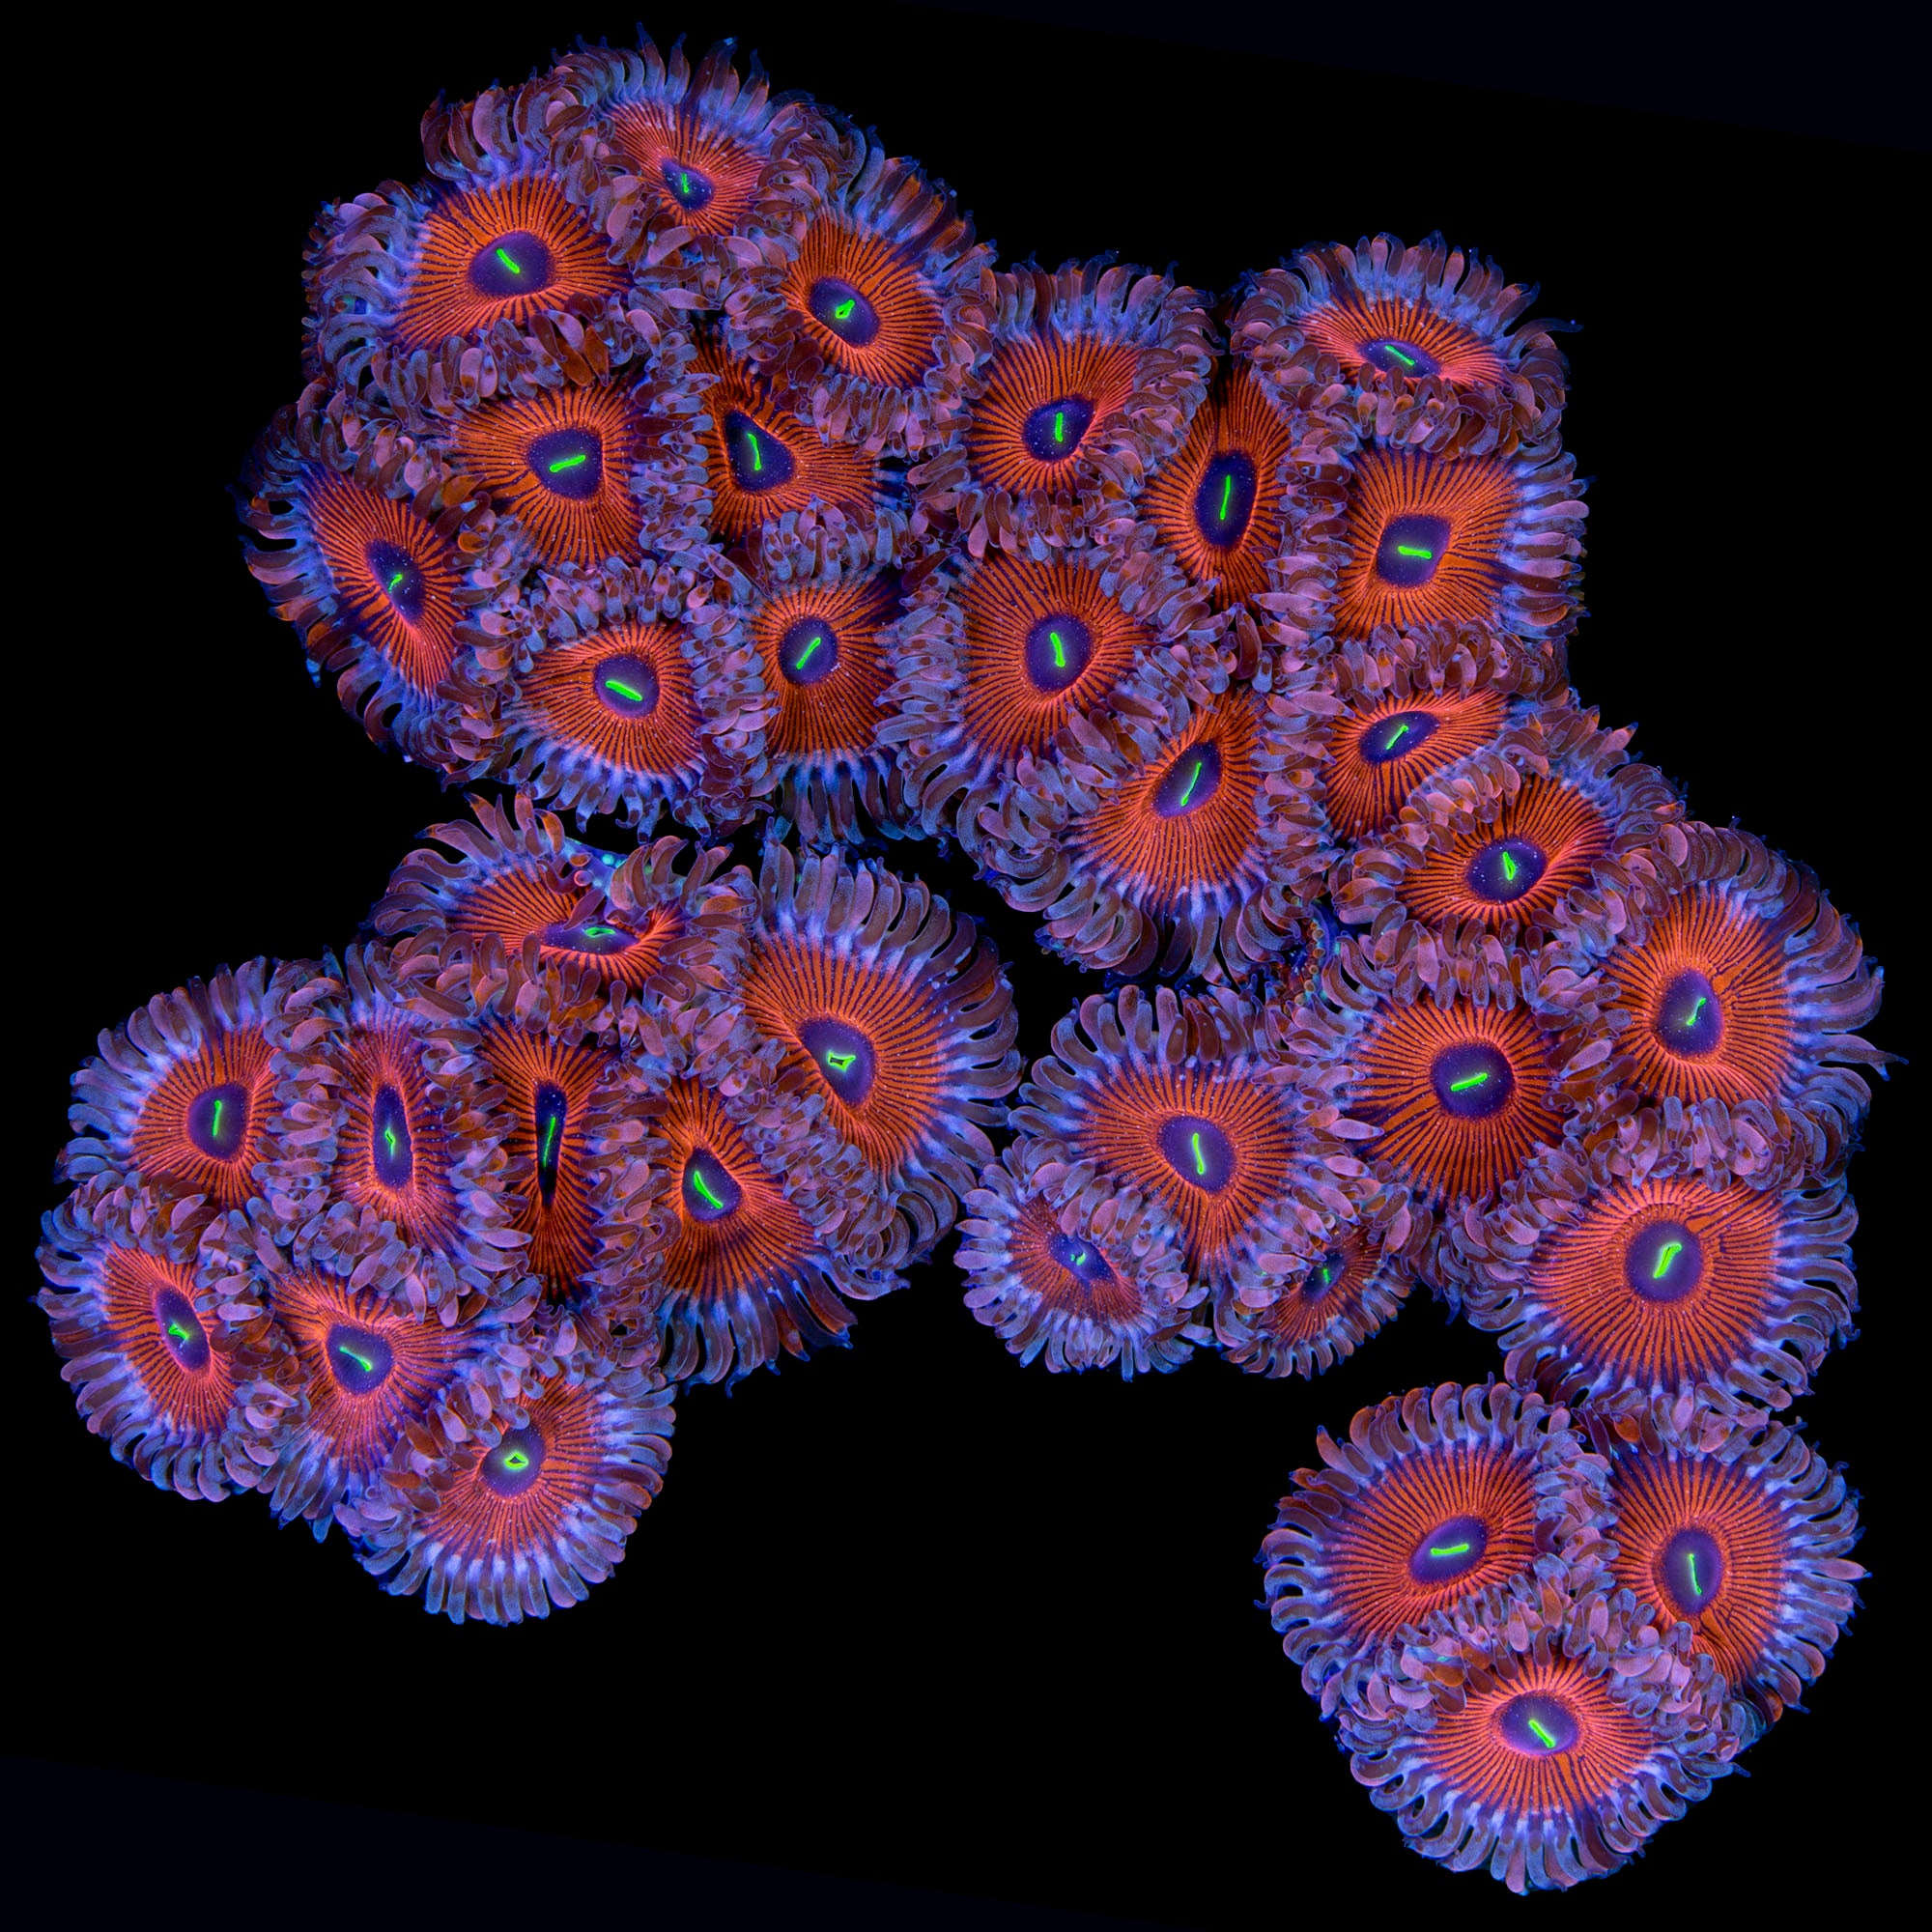 Vivid's Agave Zoanthids